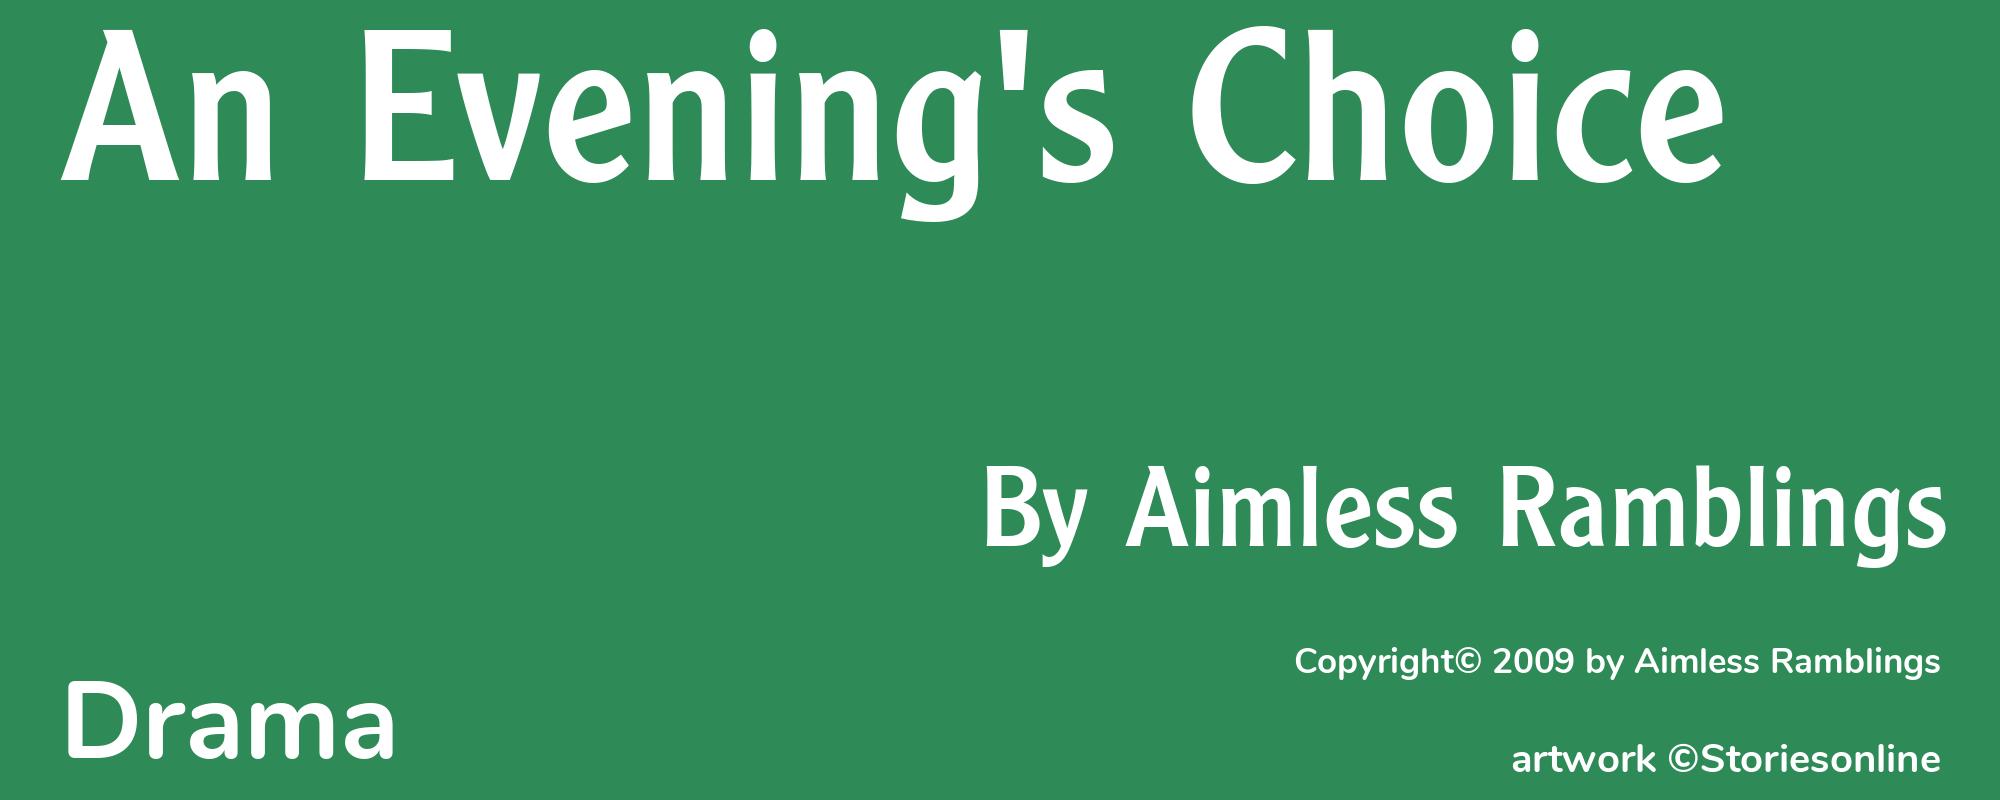 An Evening's Choice - Cover